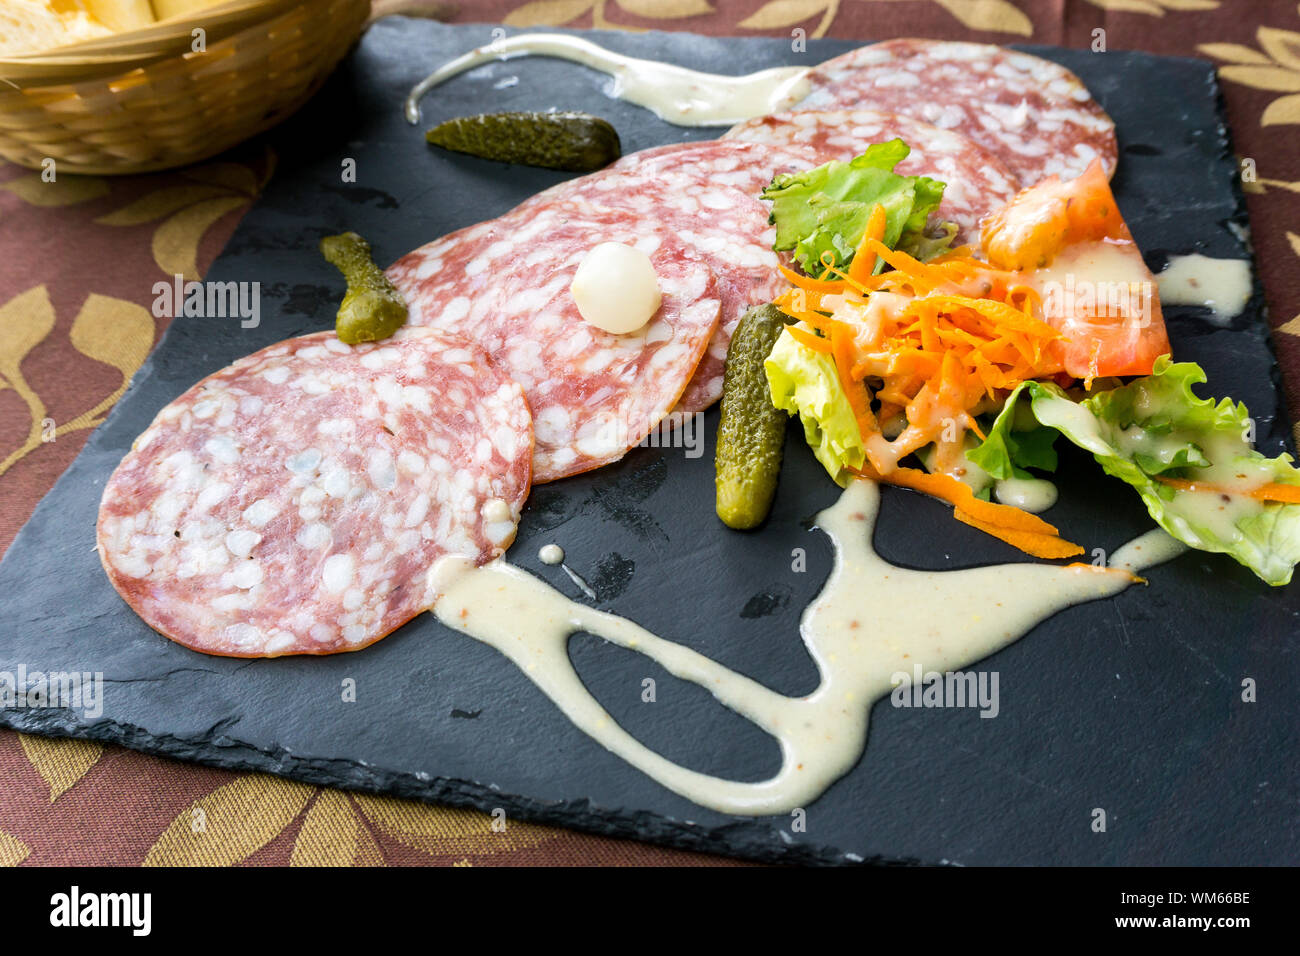 High Angle View Of Meat On Graphite Stock Photo